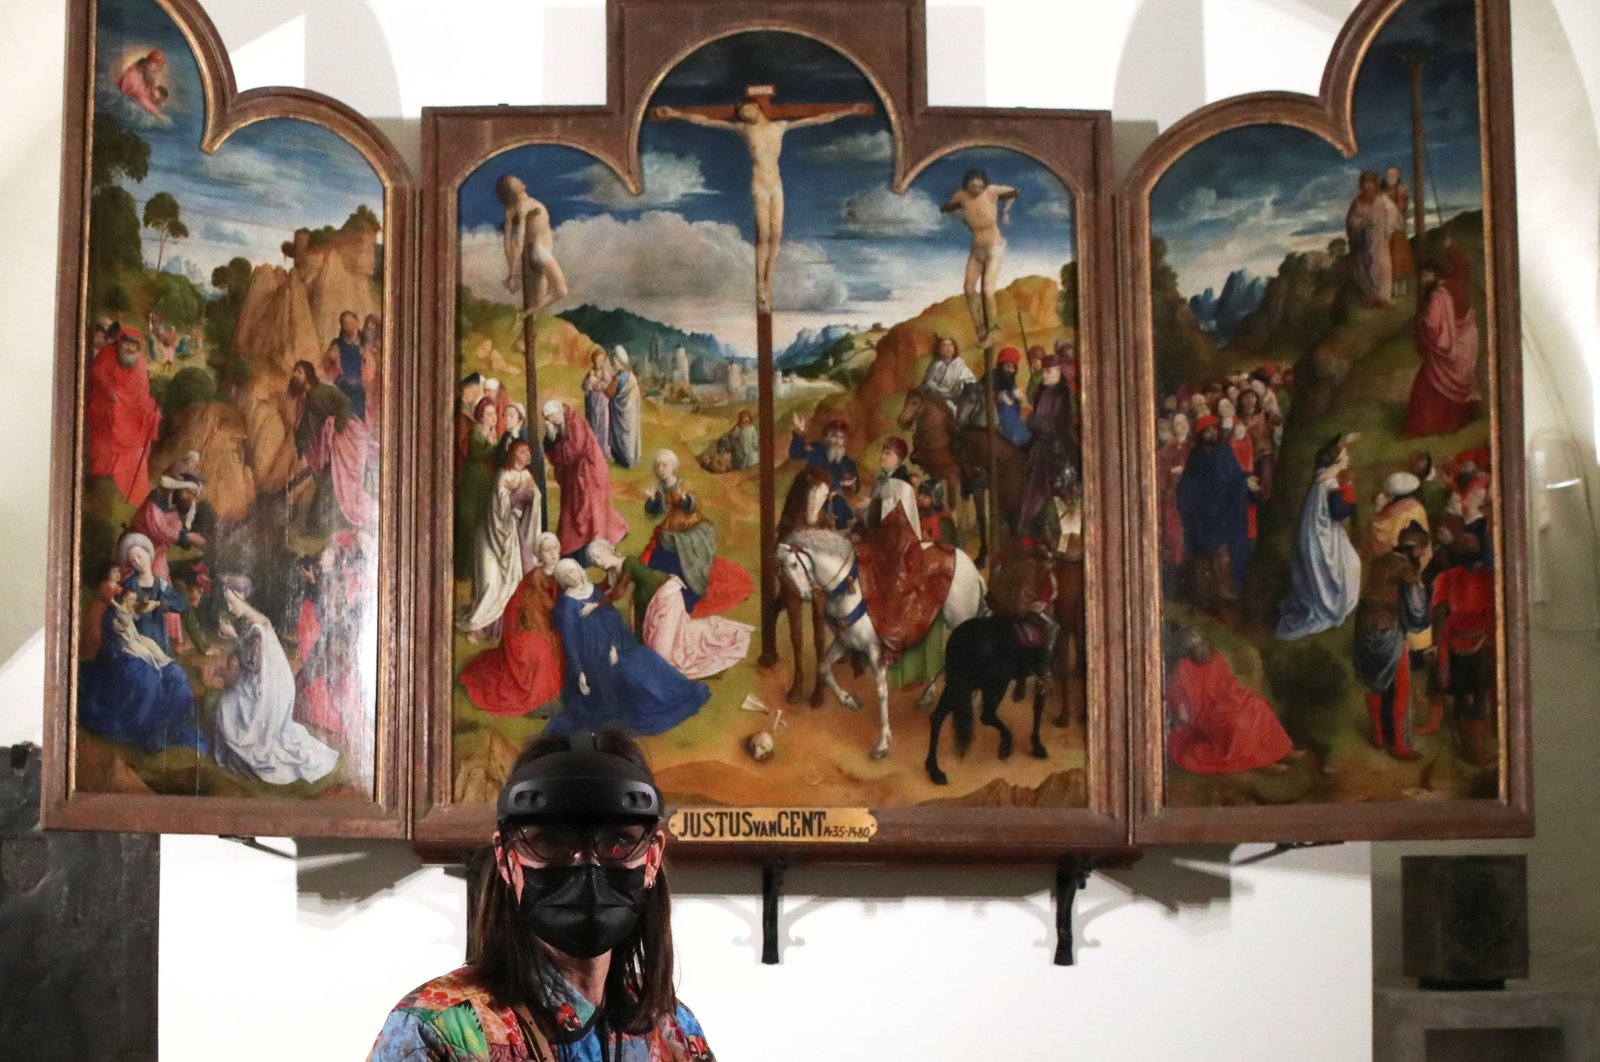 A visitor wears virtual glasses during a visit at St Bavo's Cathedral where Flemish painter Jan Van Eyck's 15th century masterpiece "Ghent Altarpiece" is displayed in Ghent, Belgium, March 26, 2021. (Reuters Photo)